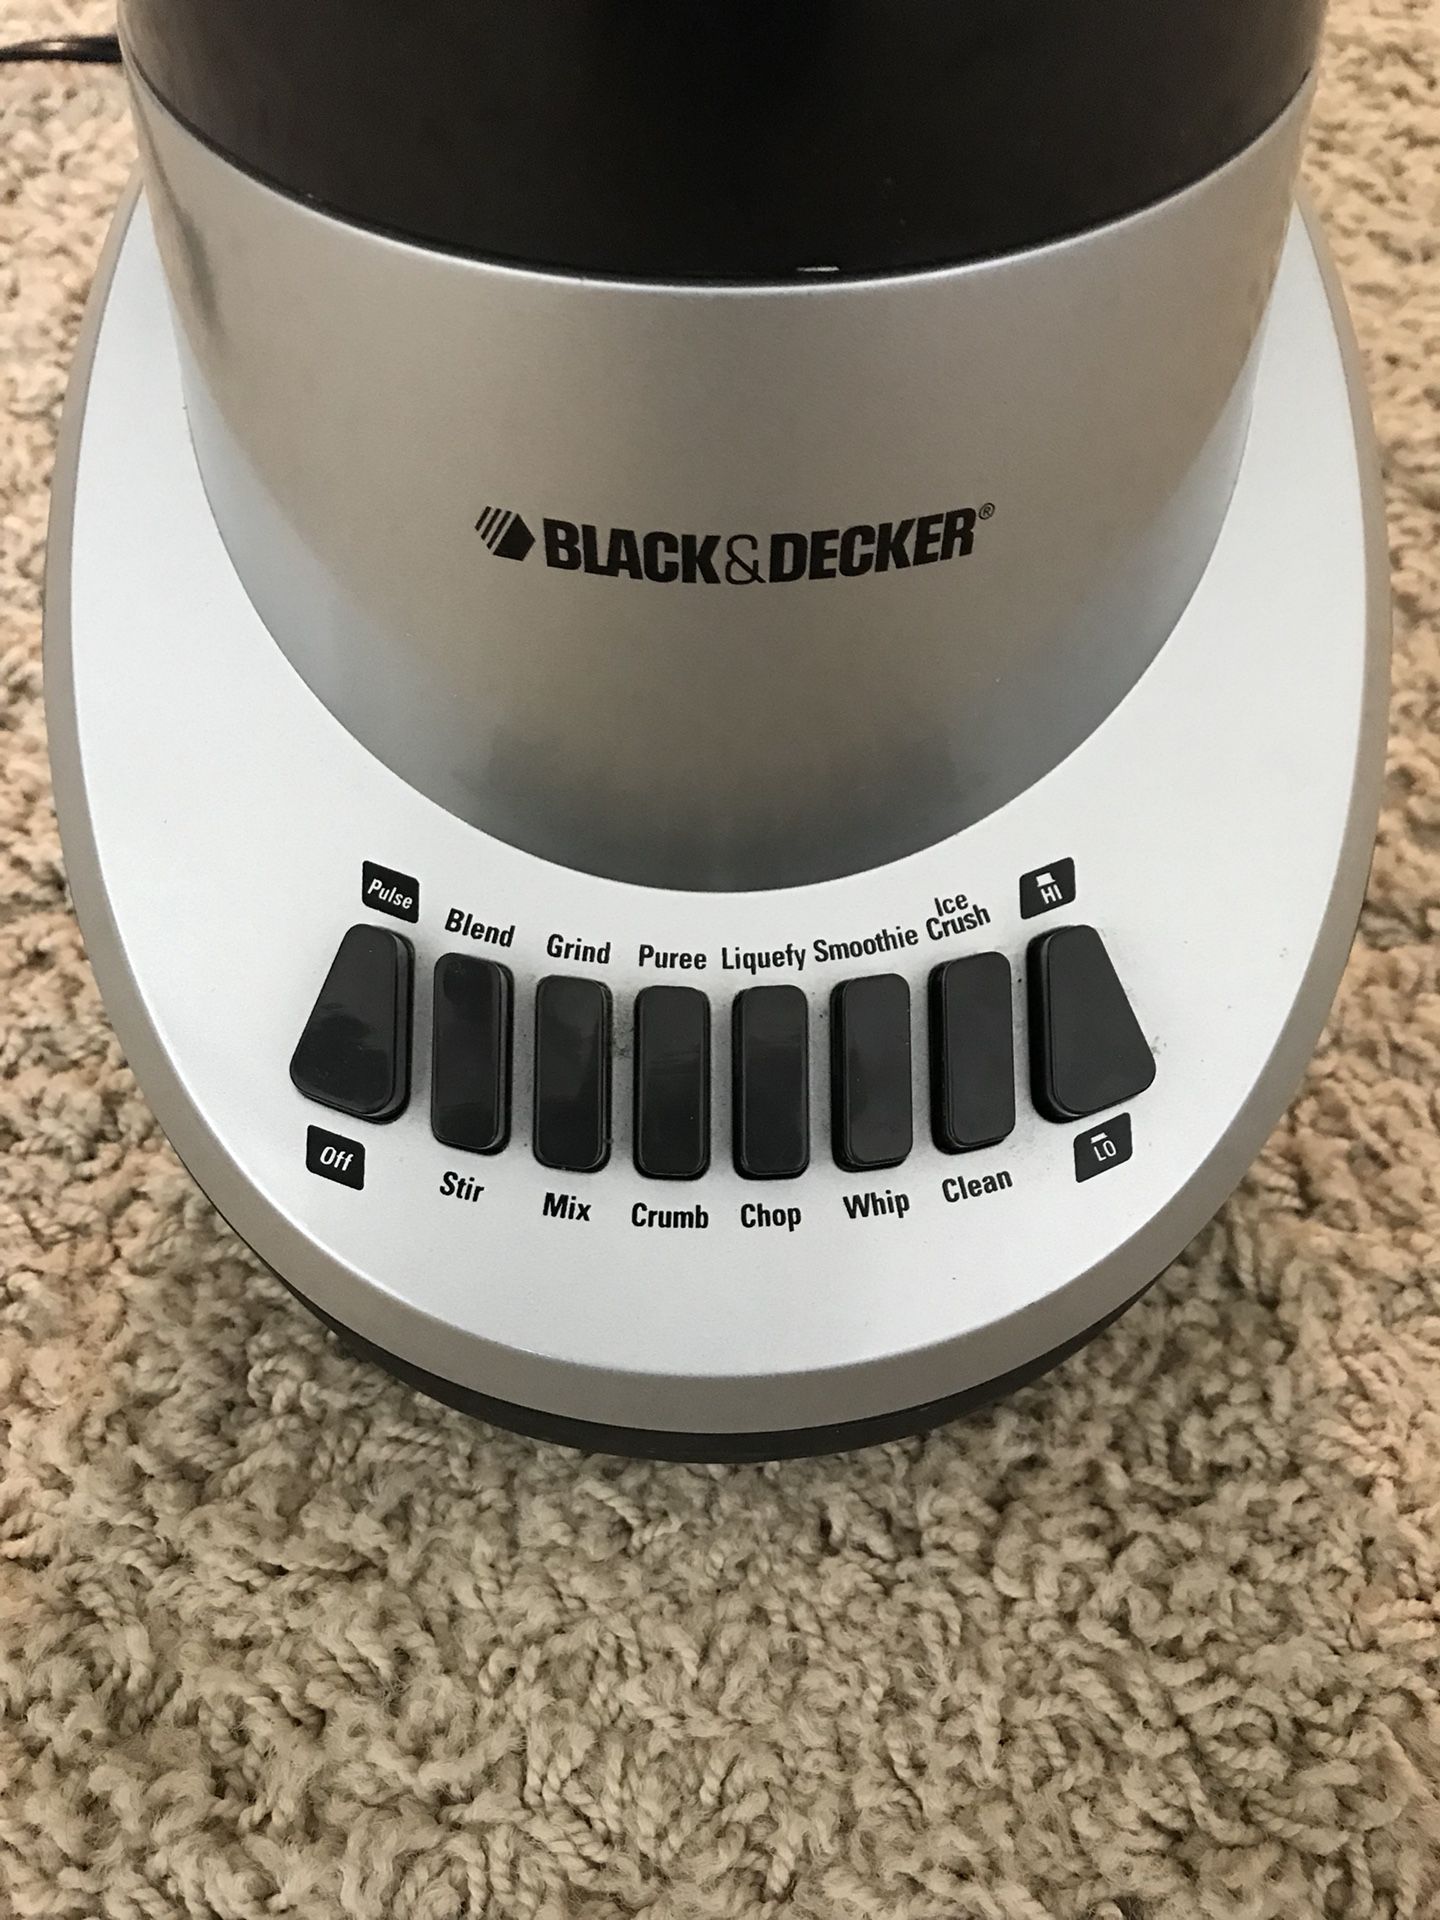  BLACK+DECKER BL1130SG FusionBlade Blender with 6-Cup Glass Jar,  12-Speed Settings, Silver Blender: Home & Kitchen